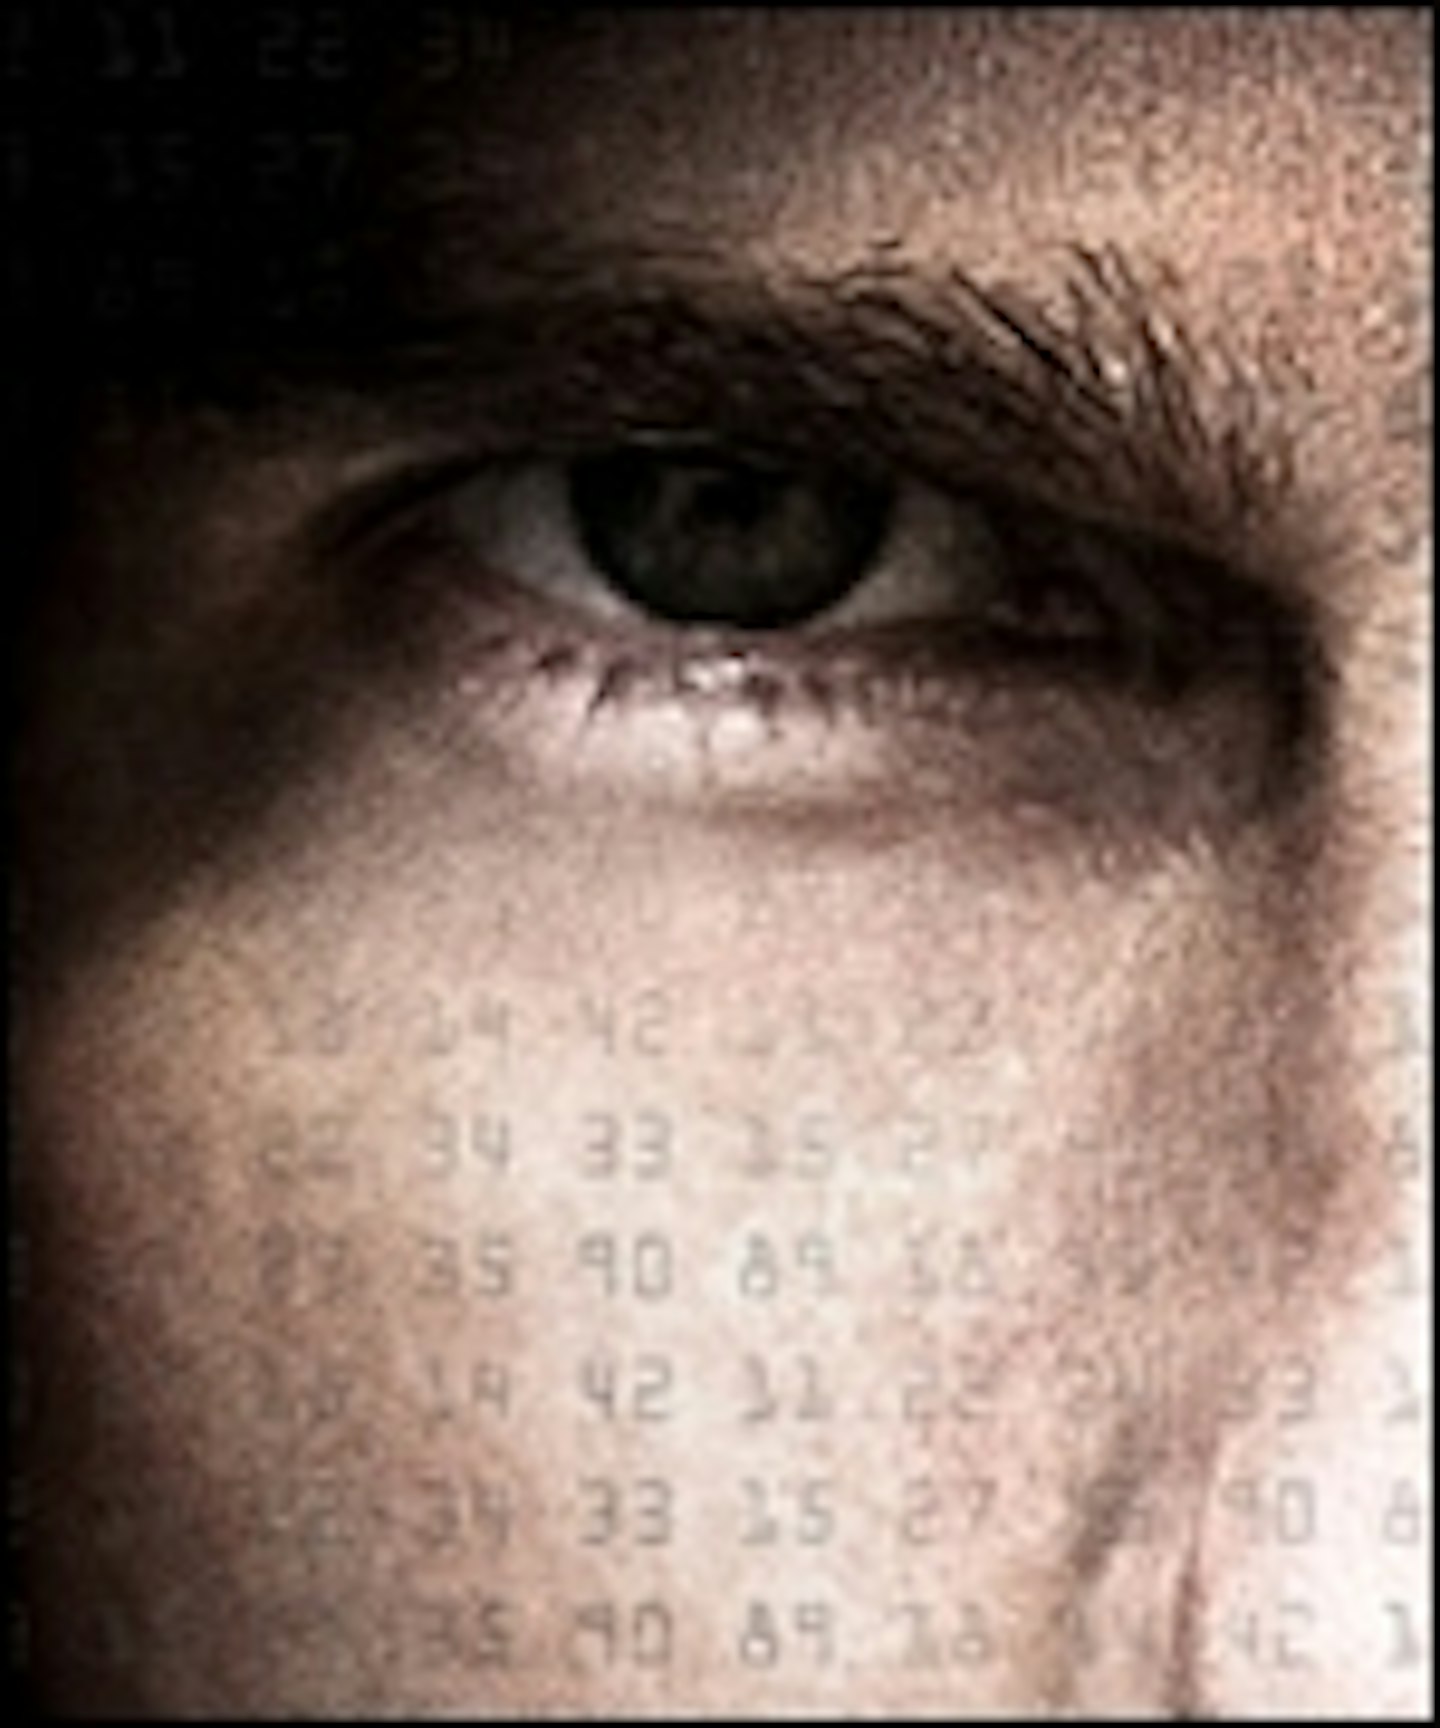 New Mission Impossible Poster Online